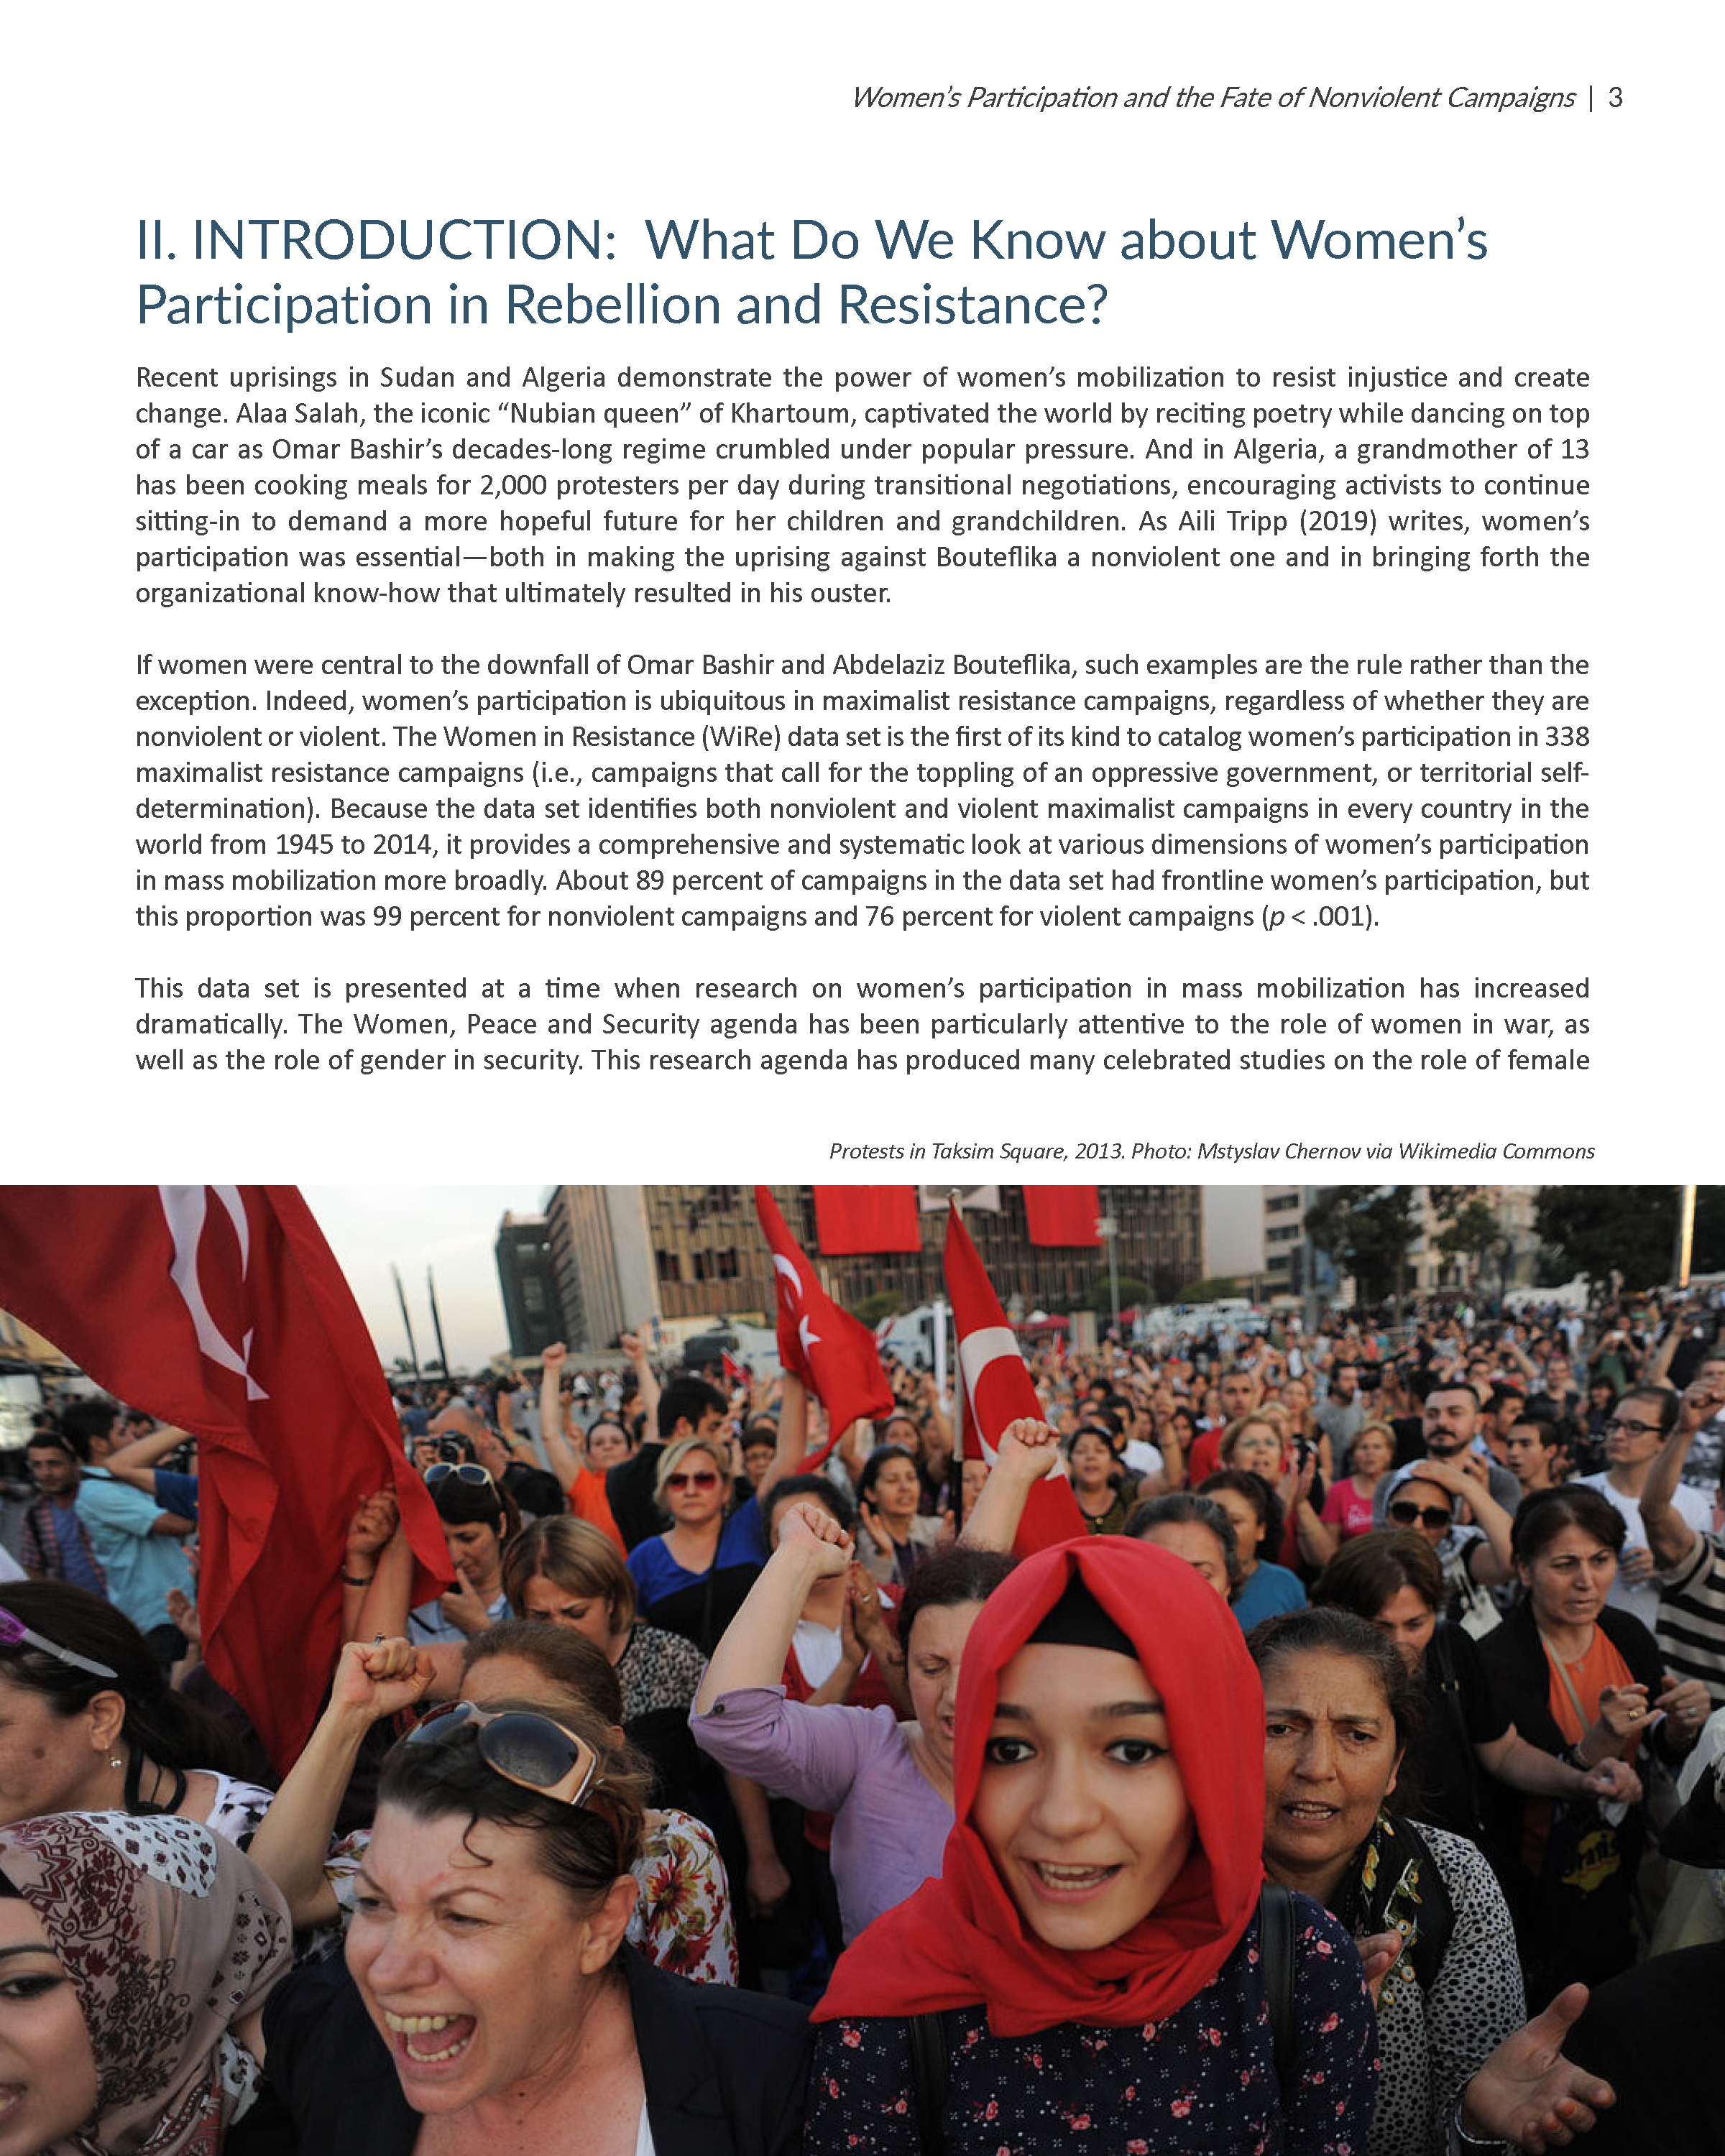 Women’s Participation and the Fate of Nonviolent Campaigns